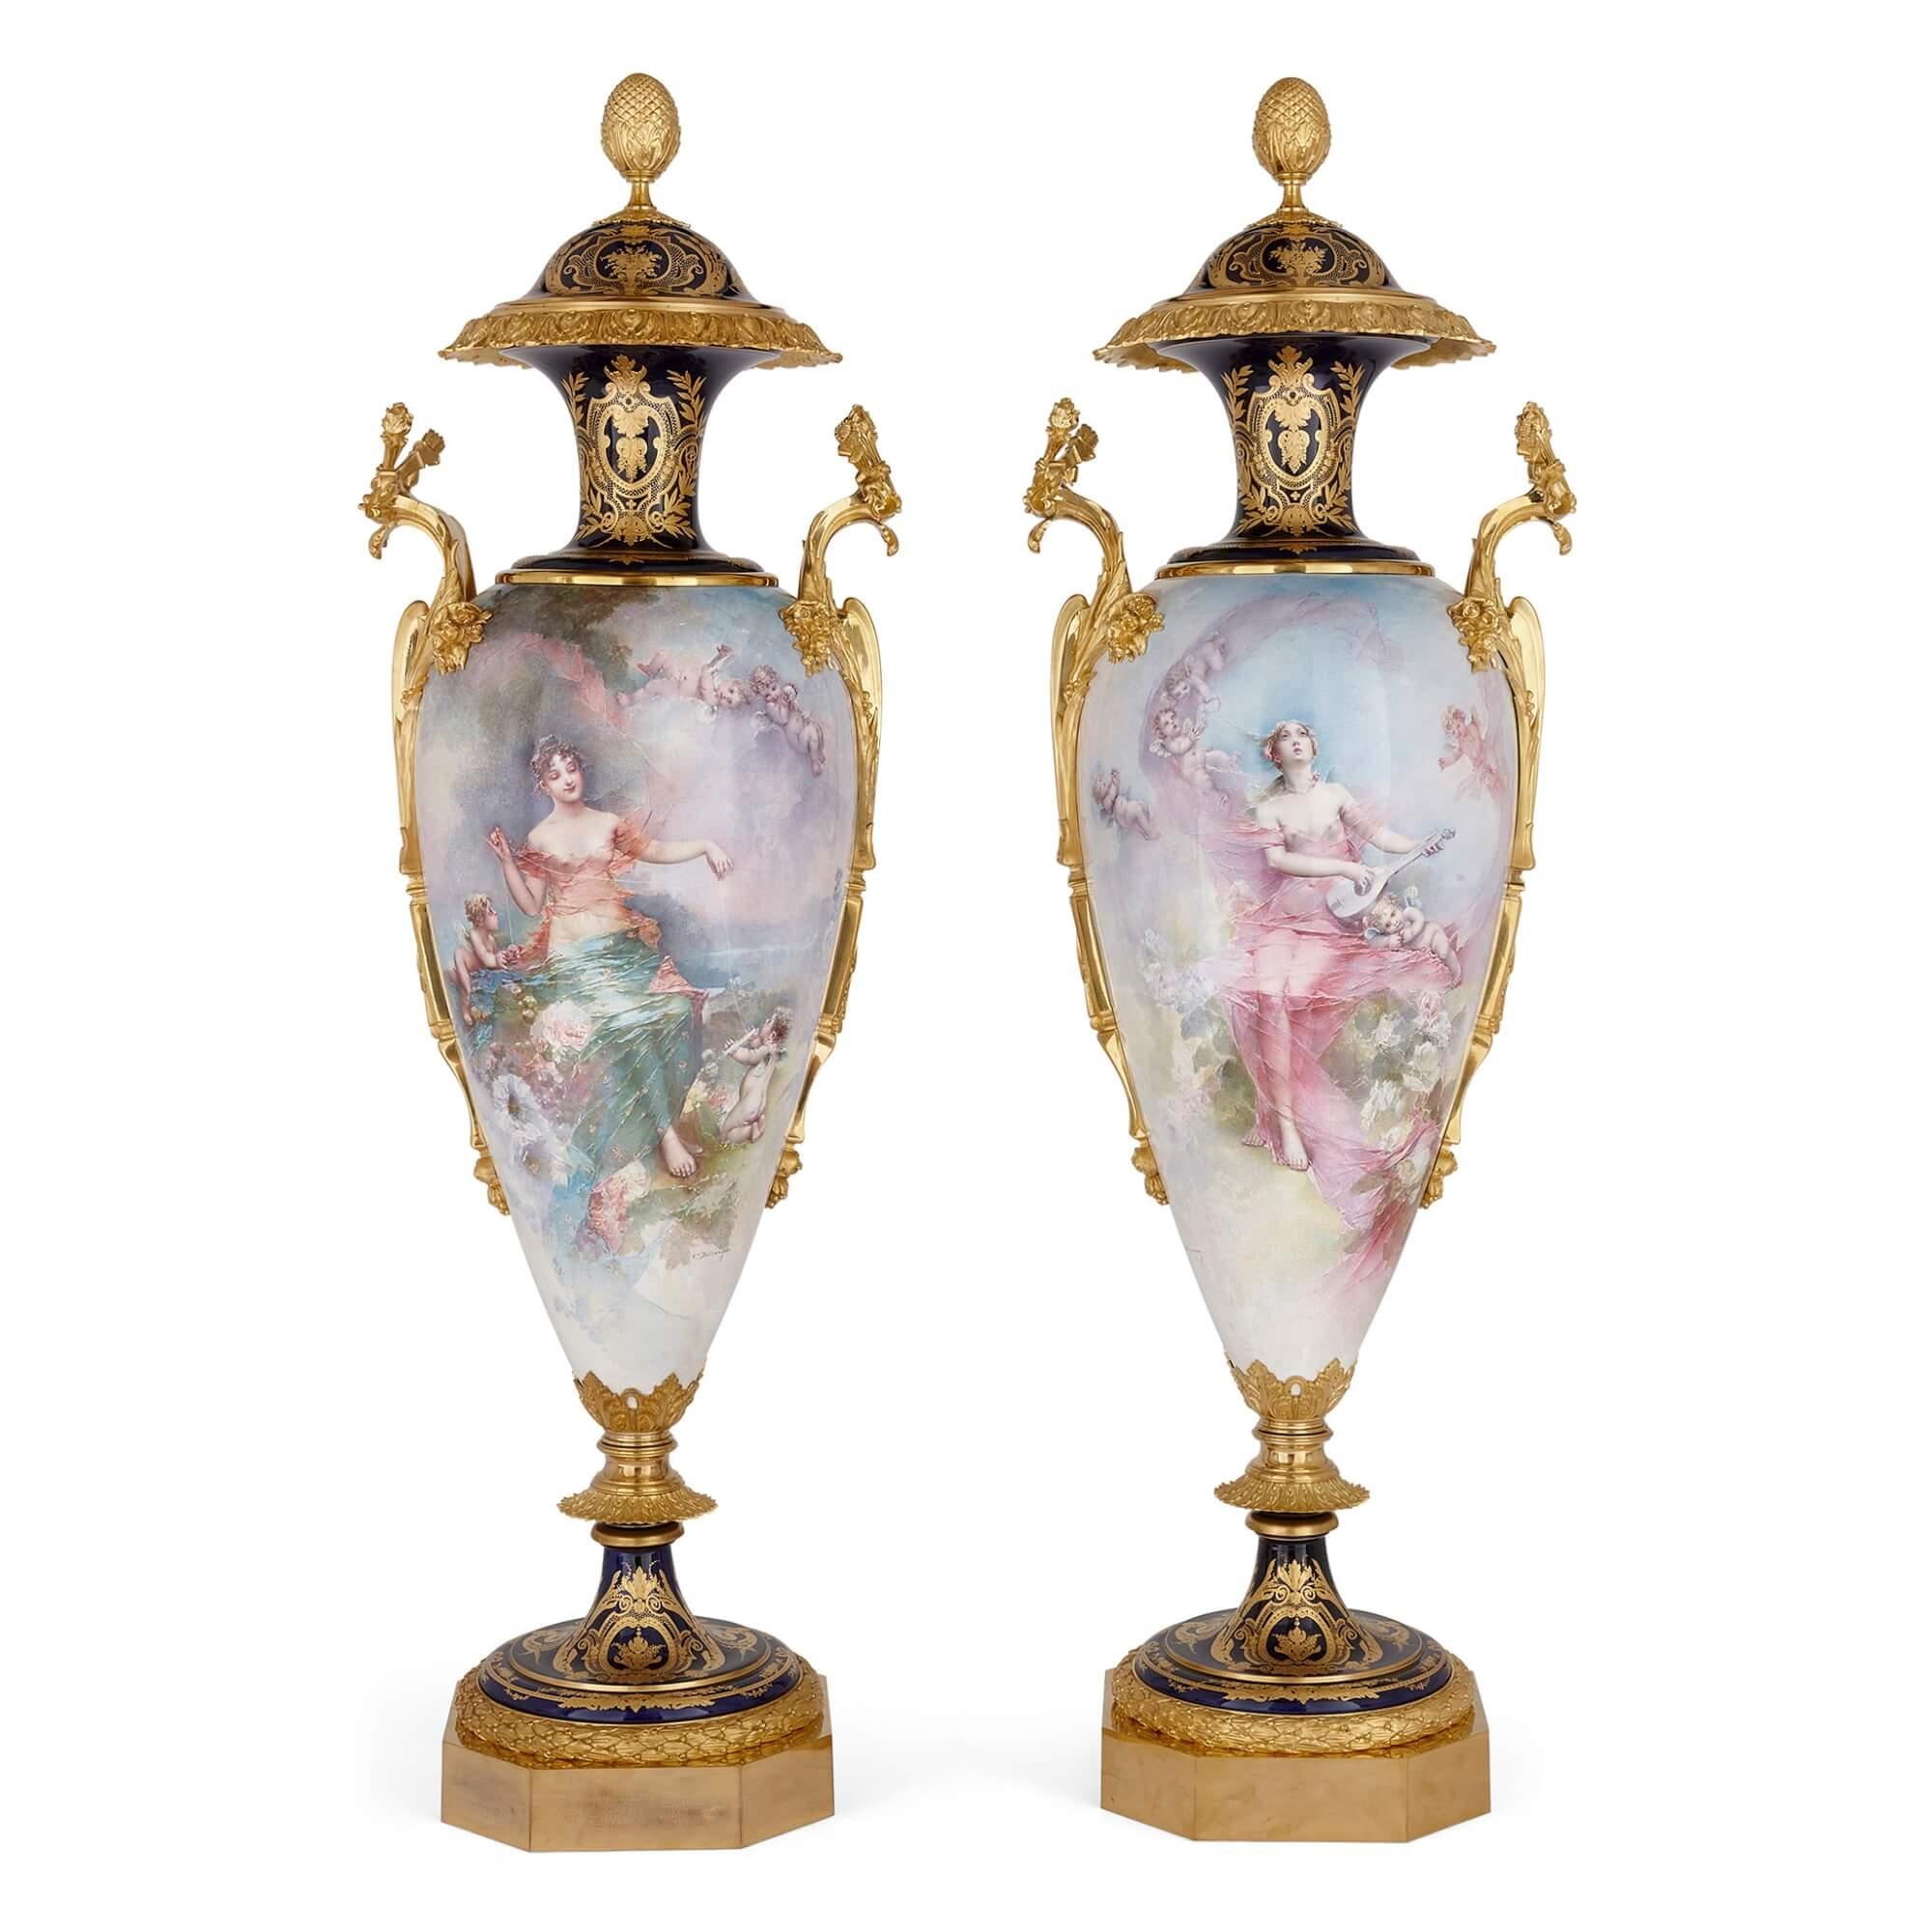 Pair of very large French Sèvres style porcelain and ormolu vases
French, Late 19th Century 
Height 151cm, width 45cm, depth 39cm

Executed in the style of Sèvres, one of the best porcelain manufactories, this pair of vases depicts a charming